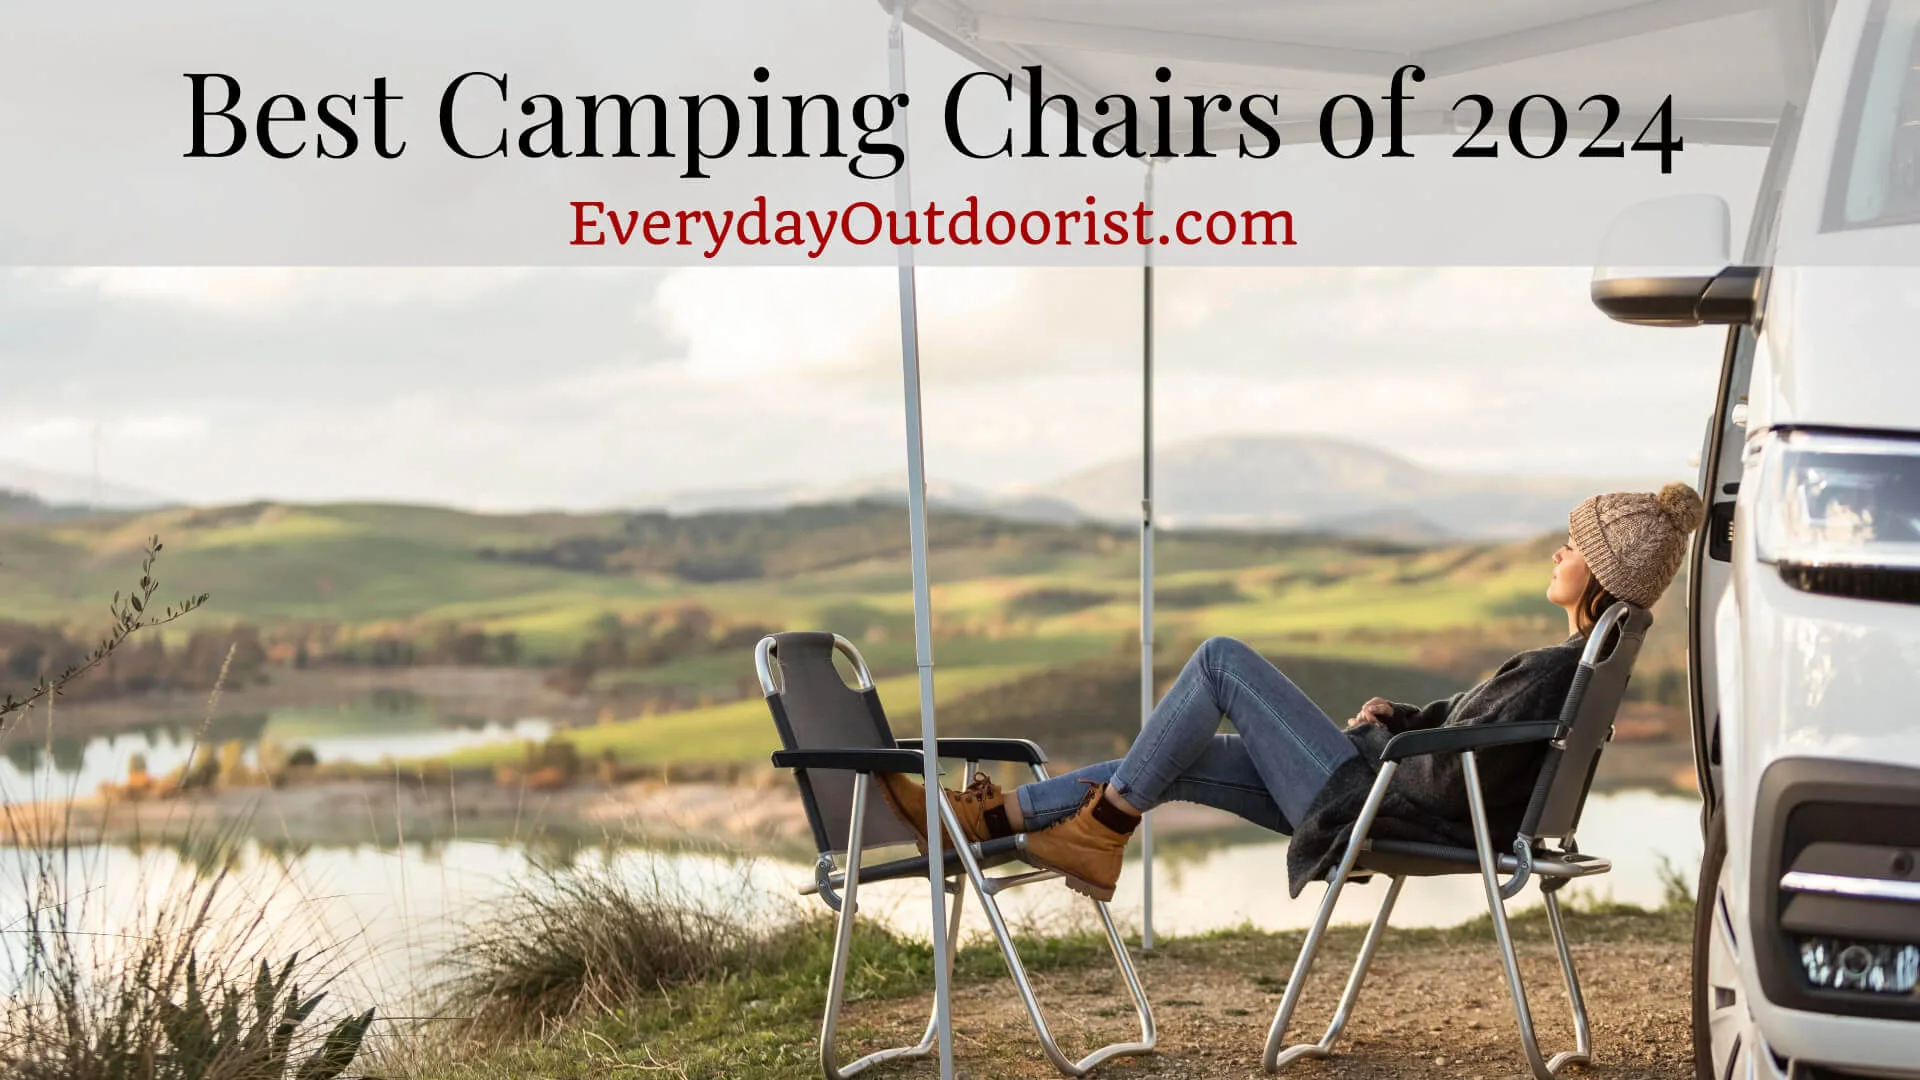 The Best Camping Chairs of 2024: Ultimate Comfort in the Great Outdoors 